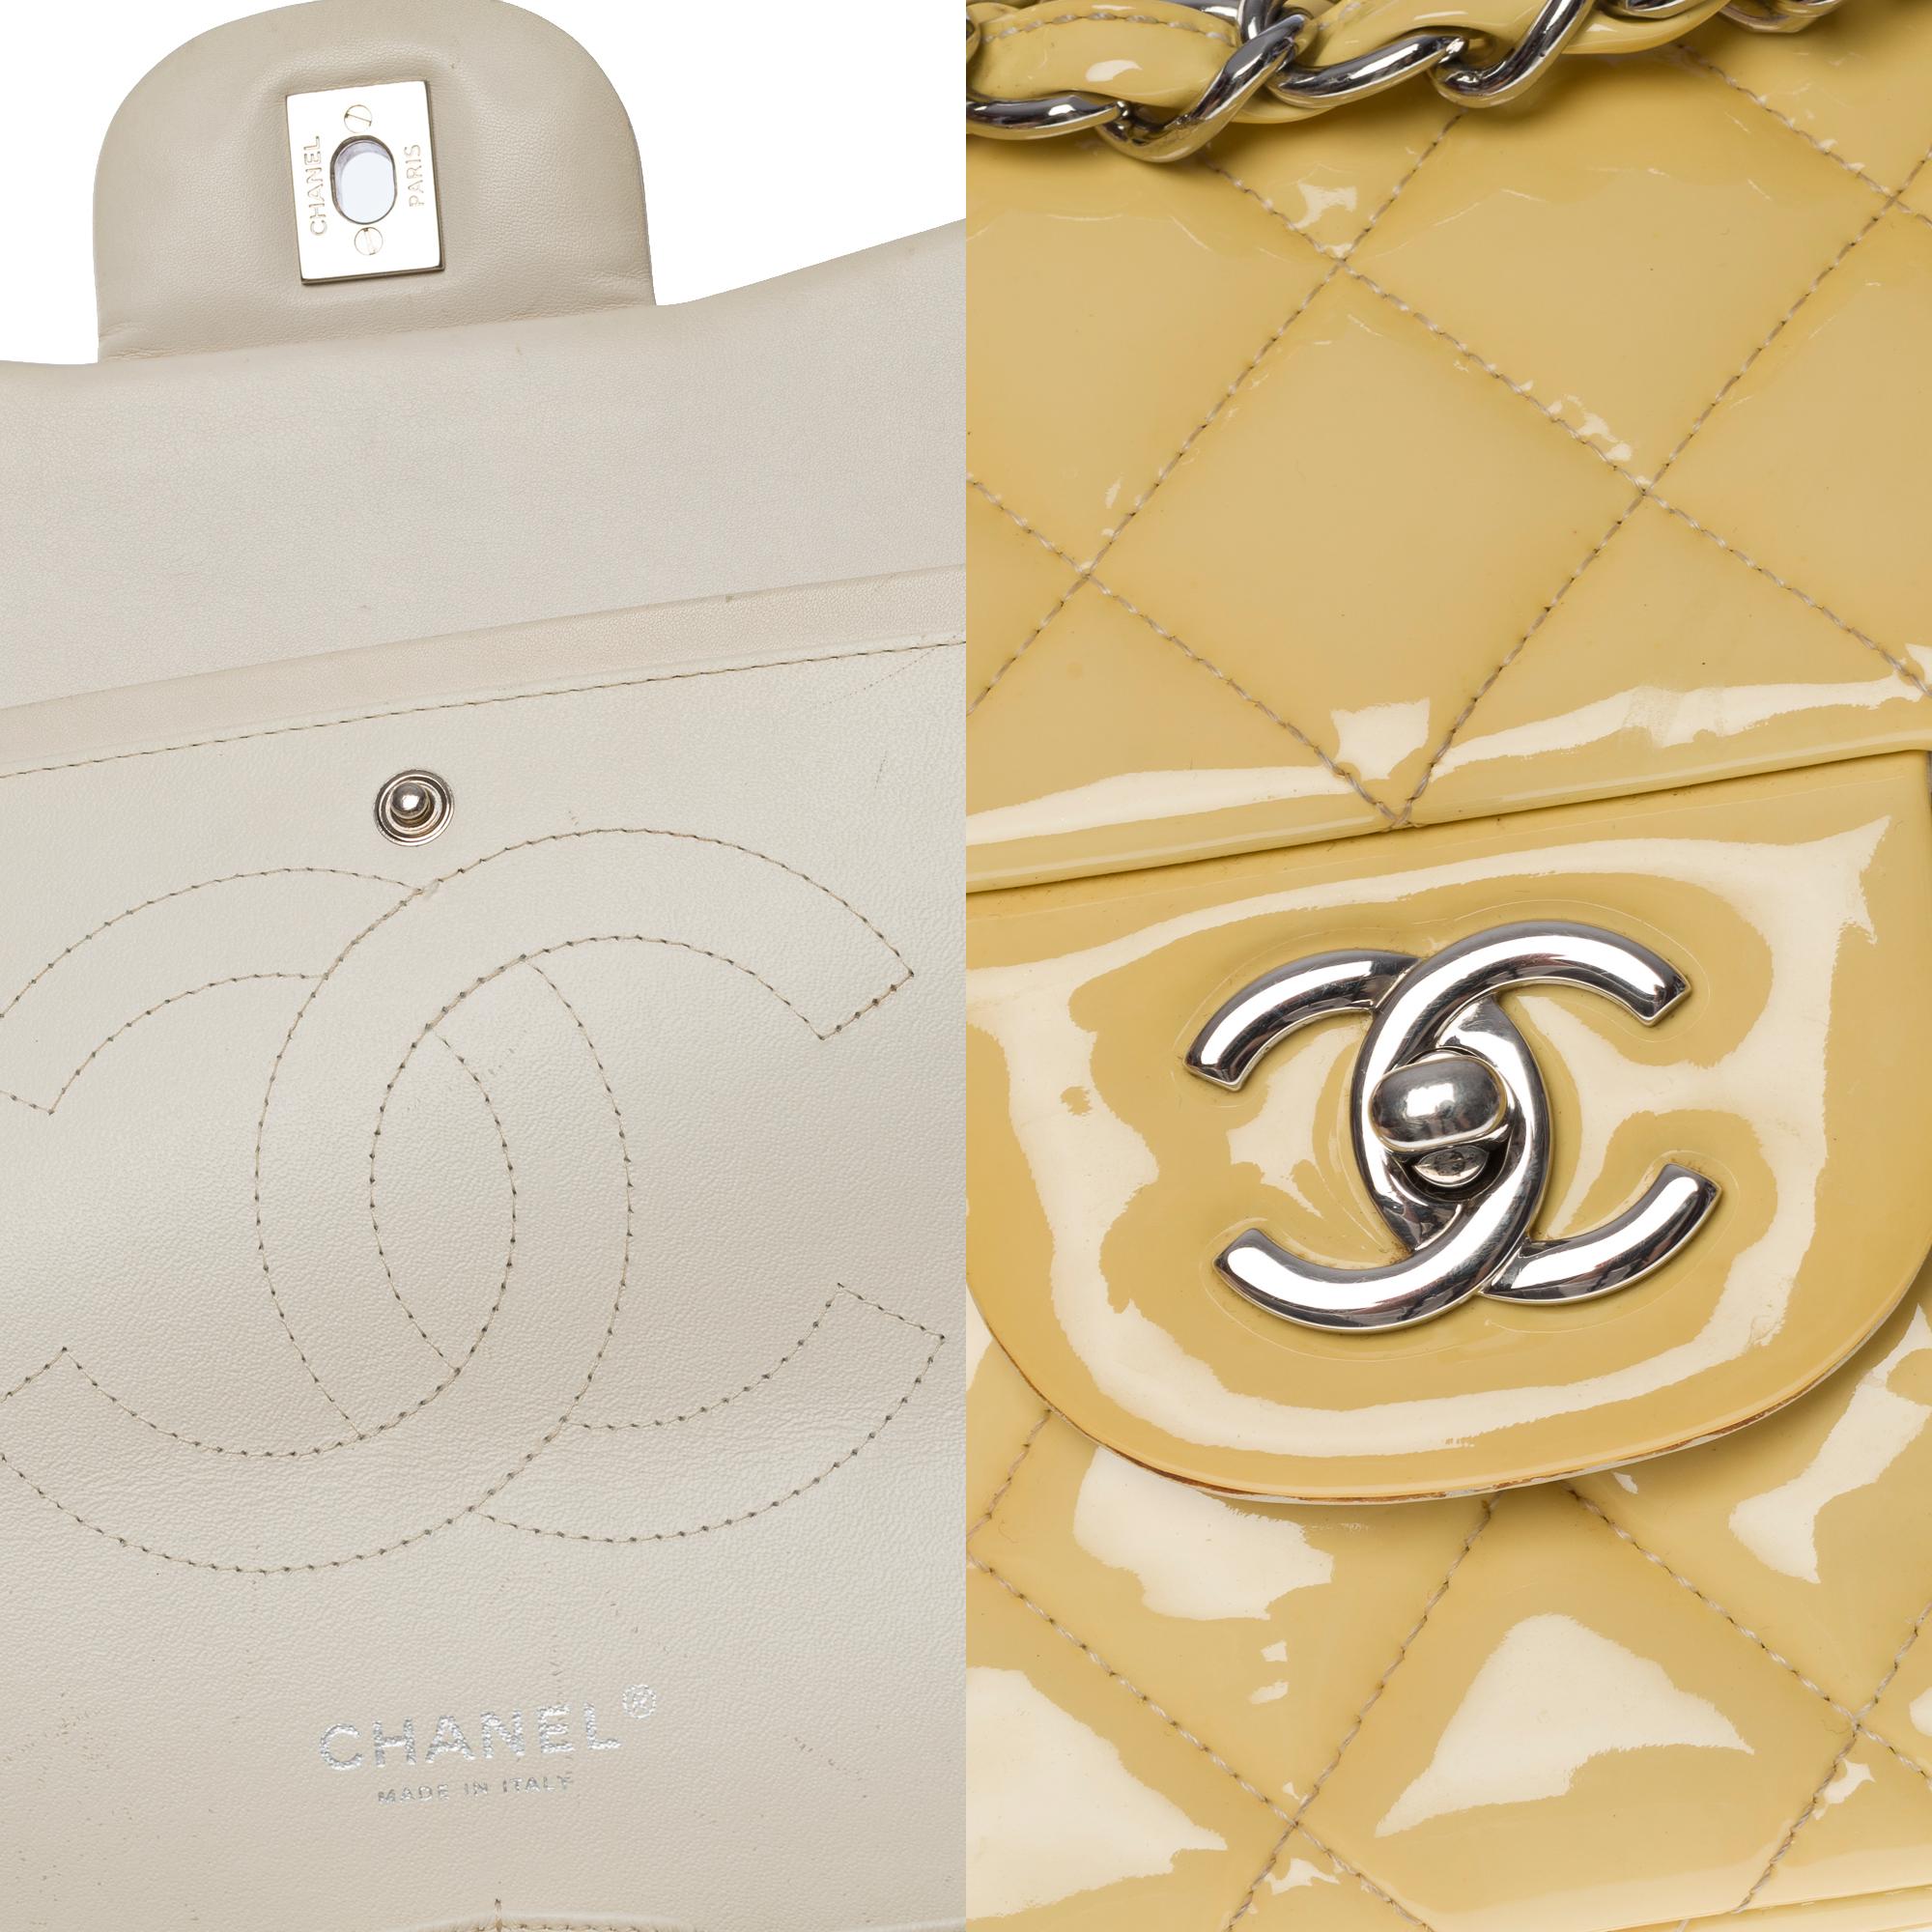 Chanel Timeless Jumbo double flap shoulder bag in yellow patent leather, SHW 1